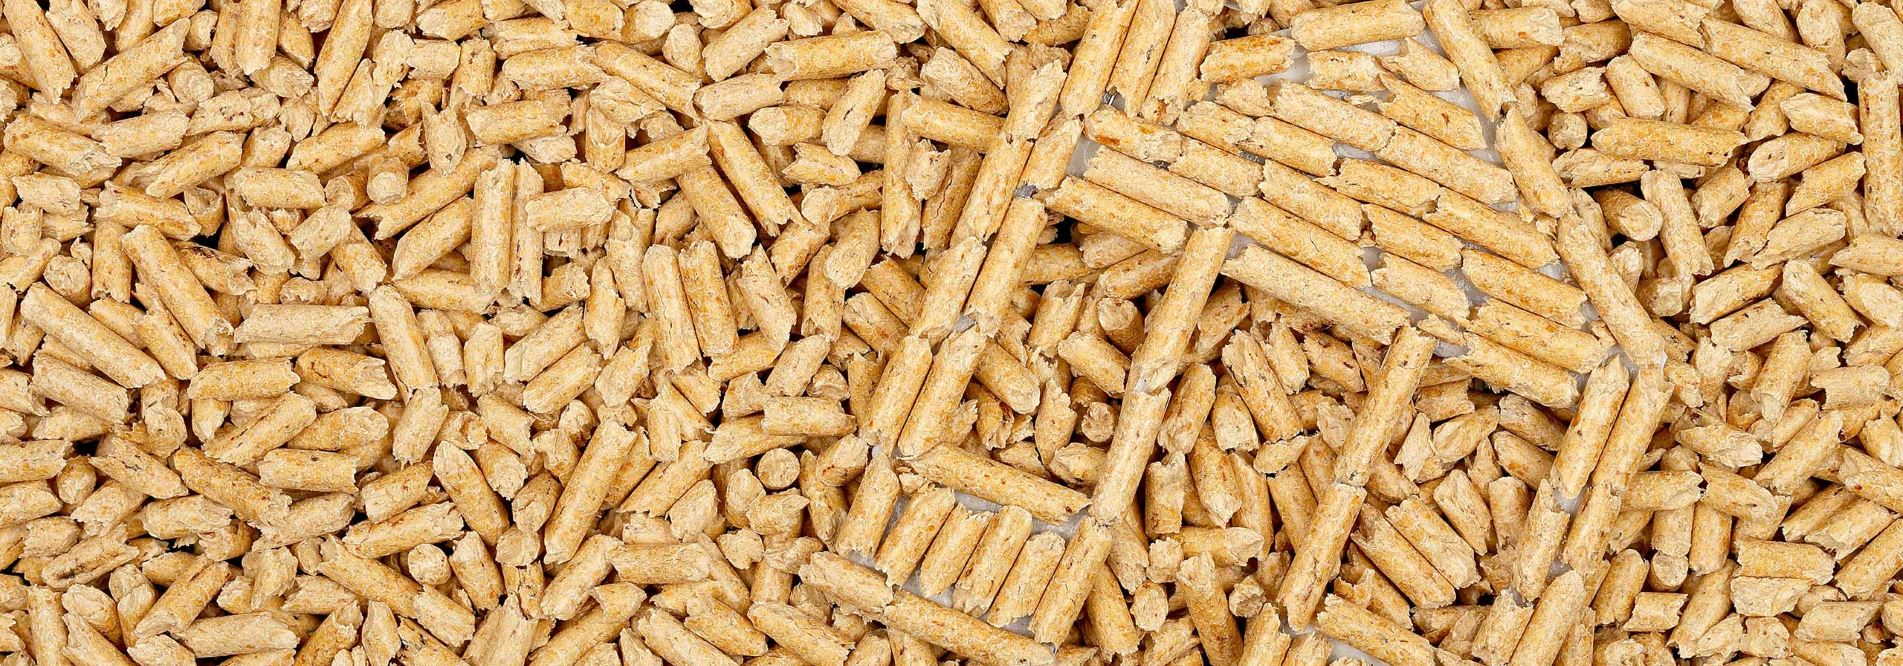 General information about Wood Pellets